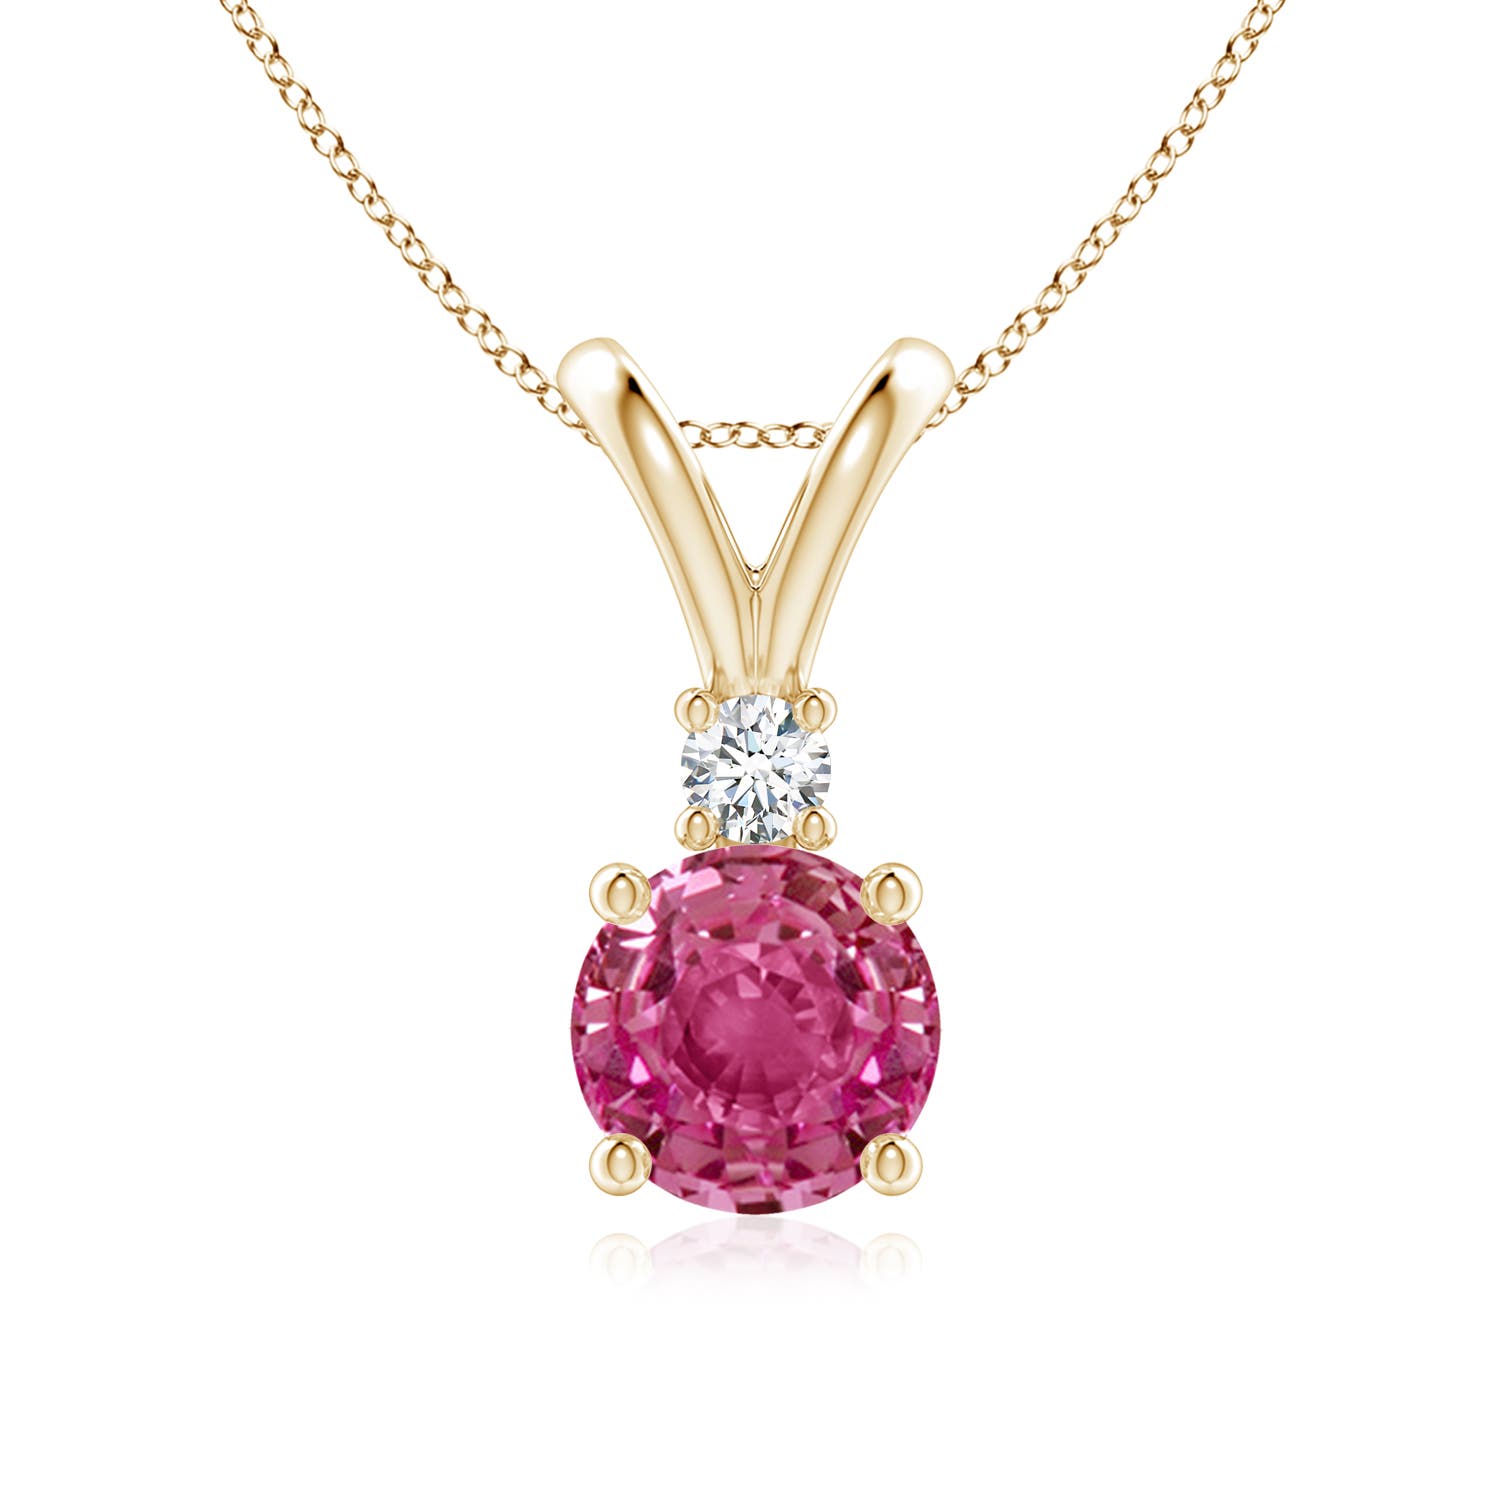 AAAA - Pink Sapphire / 1.67 CT / 14 KT Yellow Gold